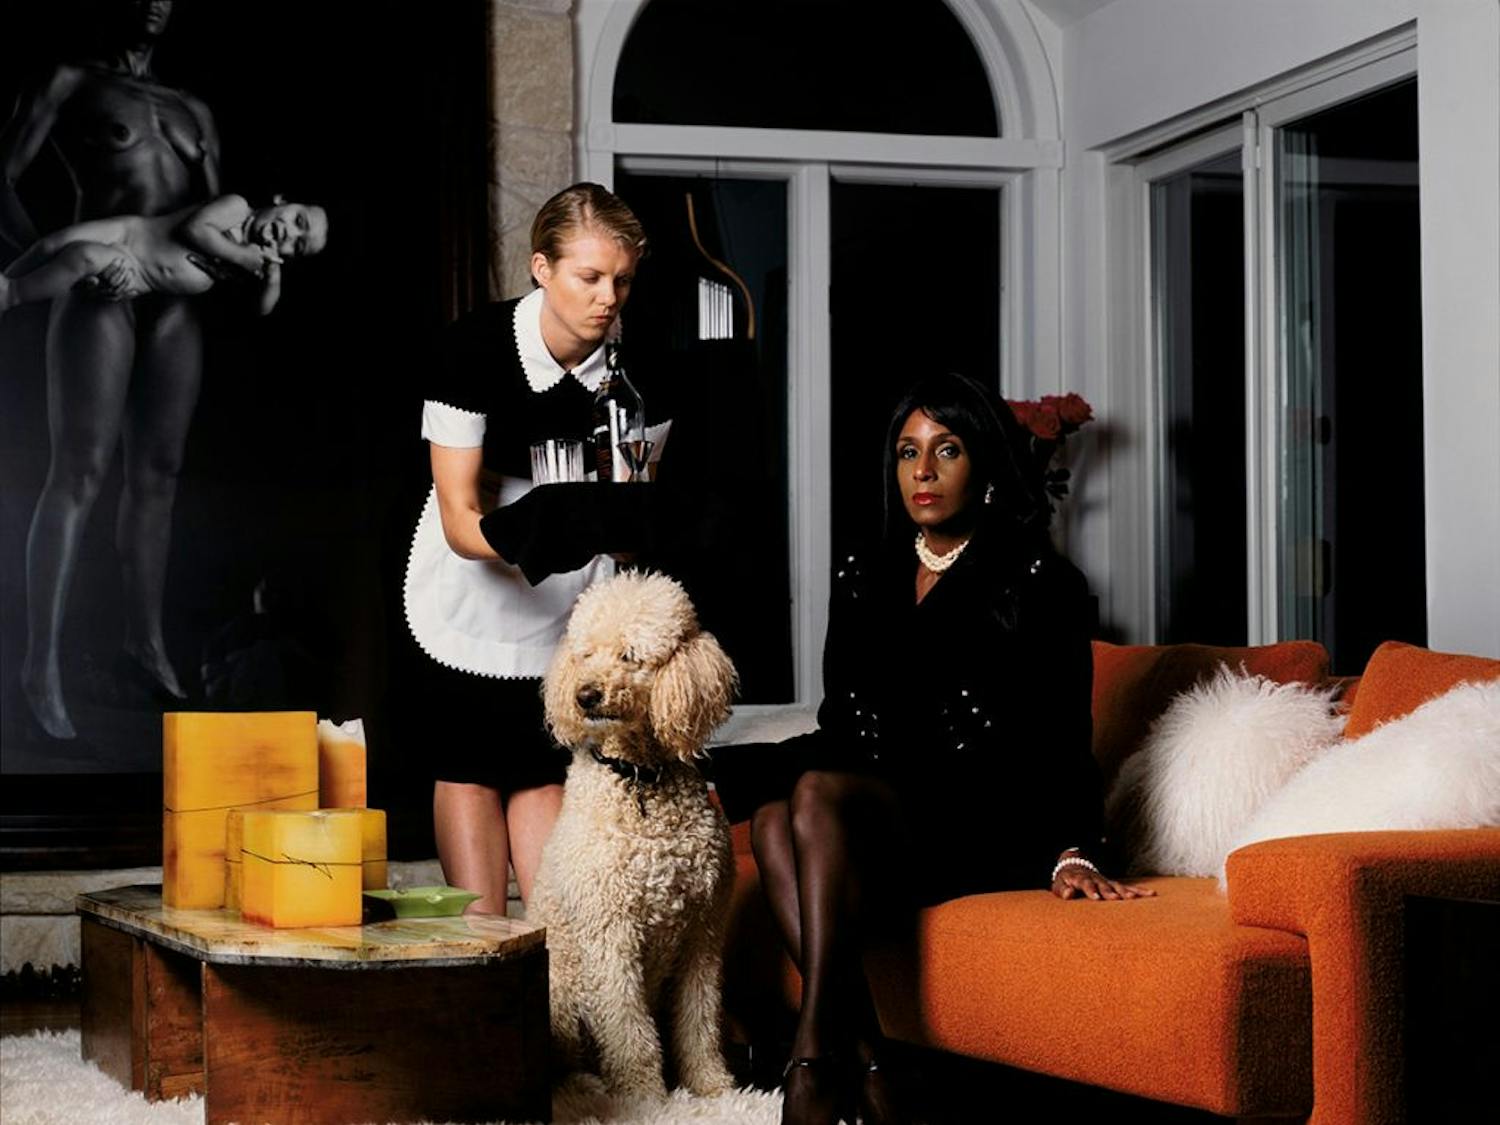 Renee Cox's  “The Housewife Missy at Home” is currently on display at the Nasher Museum as part of “In Relation to Power: Politically Engaged Works from the Collection."
